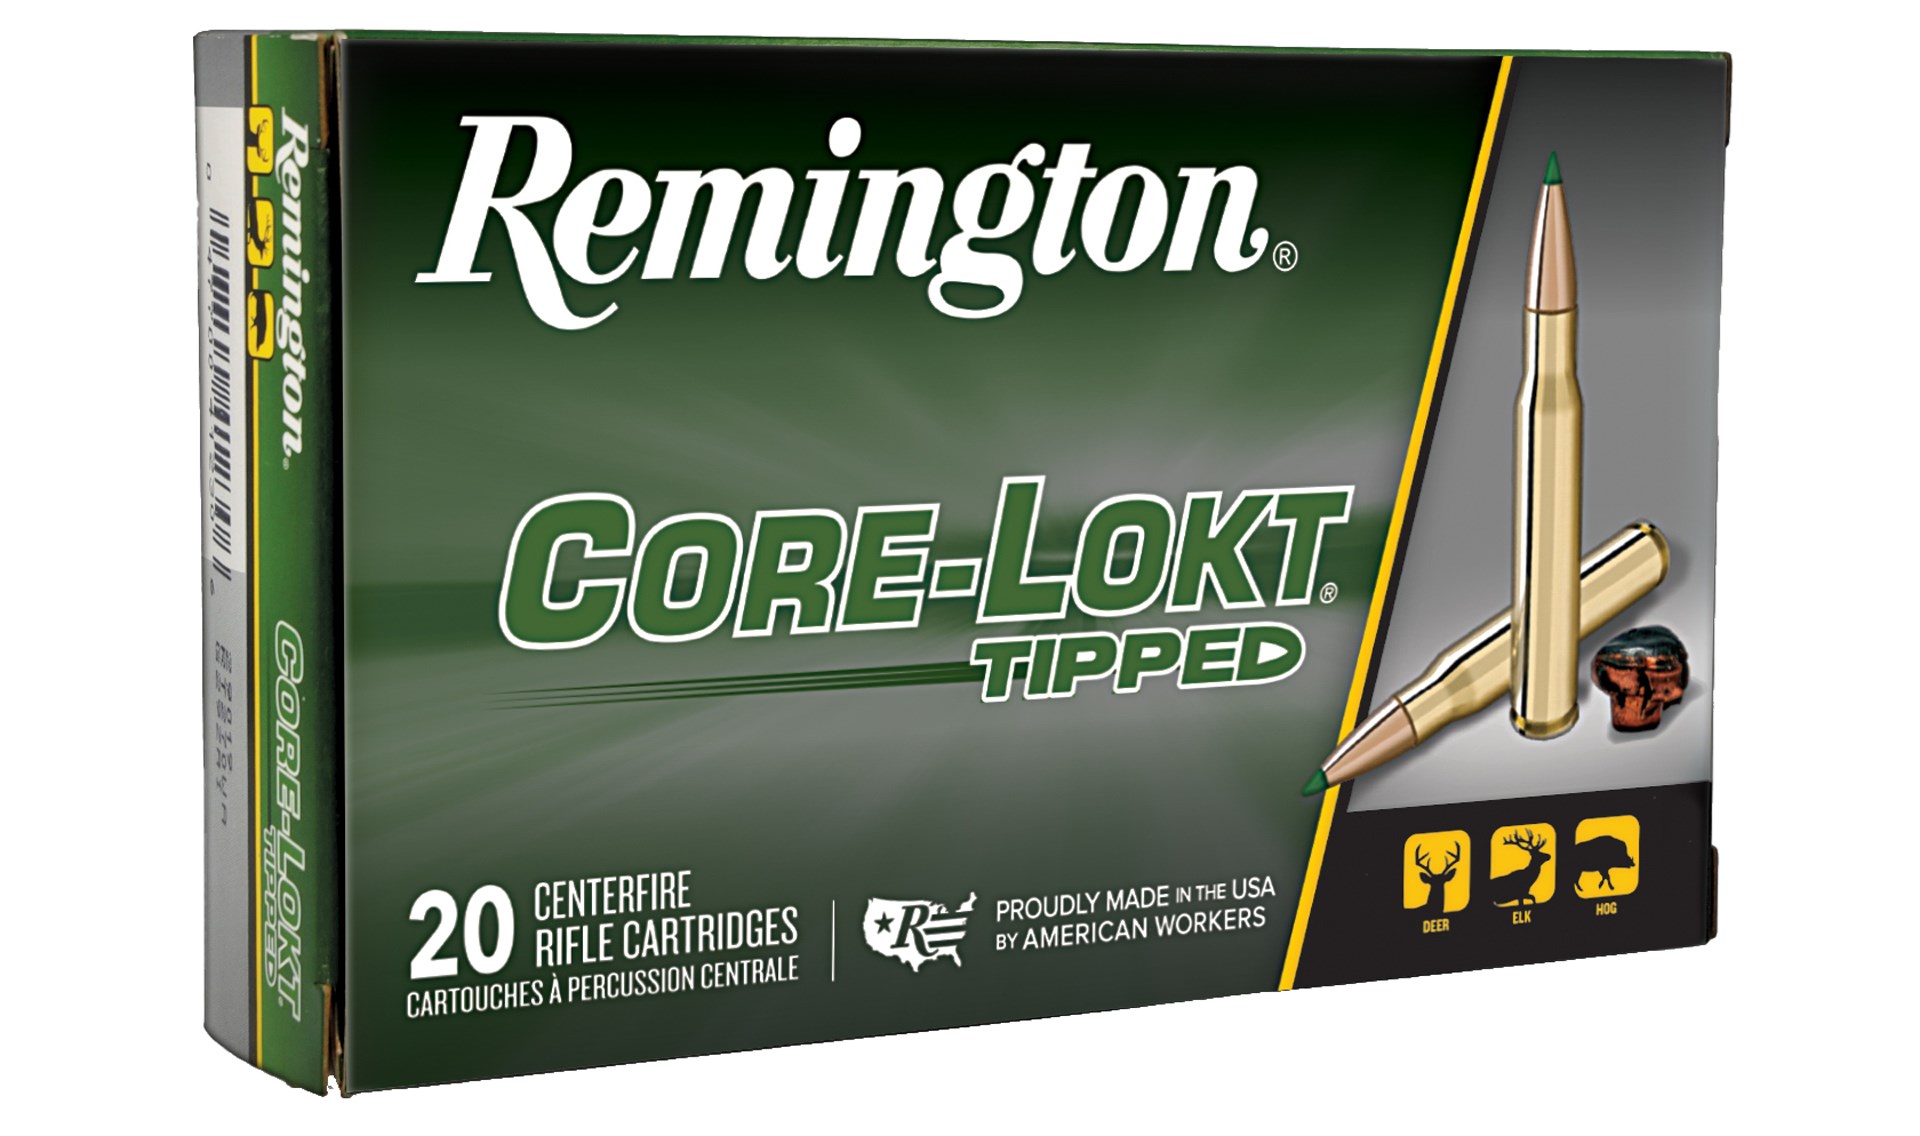 Remington Ammunition Box packaging CORE-LOKT TIPPED bullets ammo green silver brass animals text on image